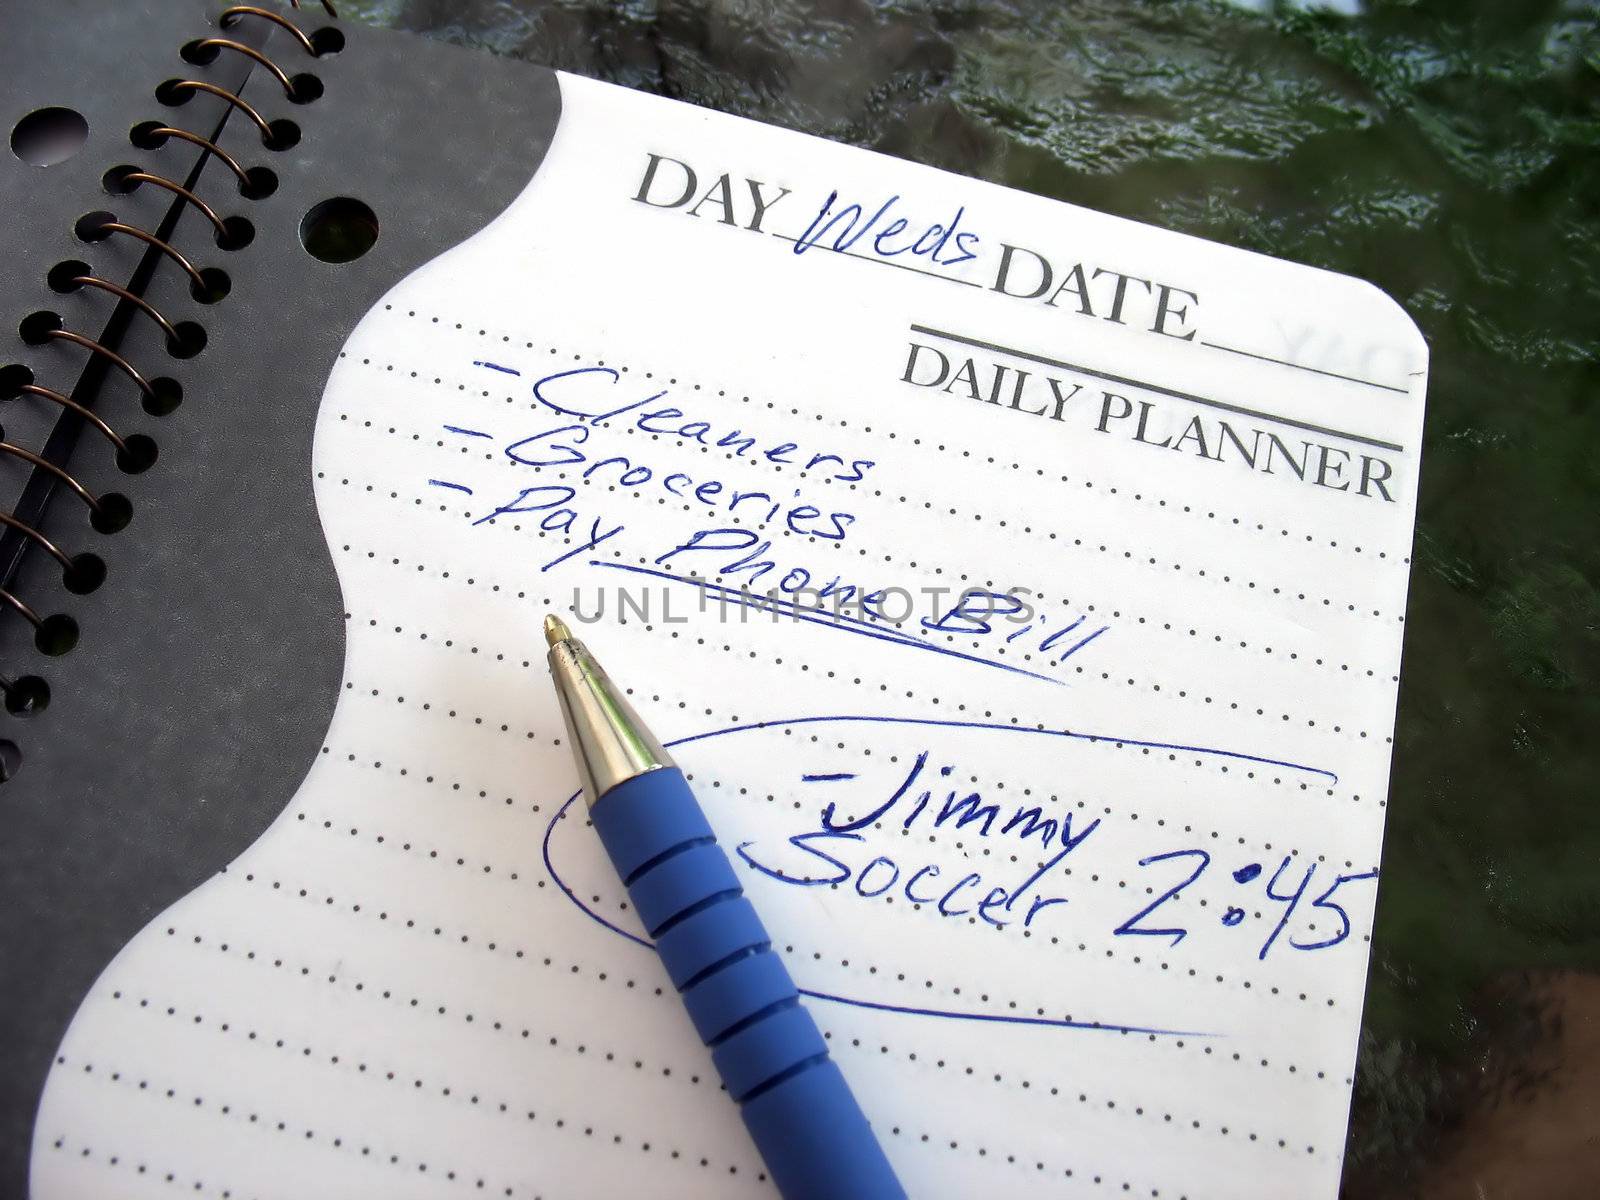 A daily planner filled with a busy parent's daily activities.